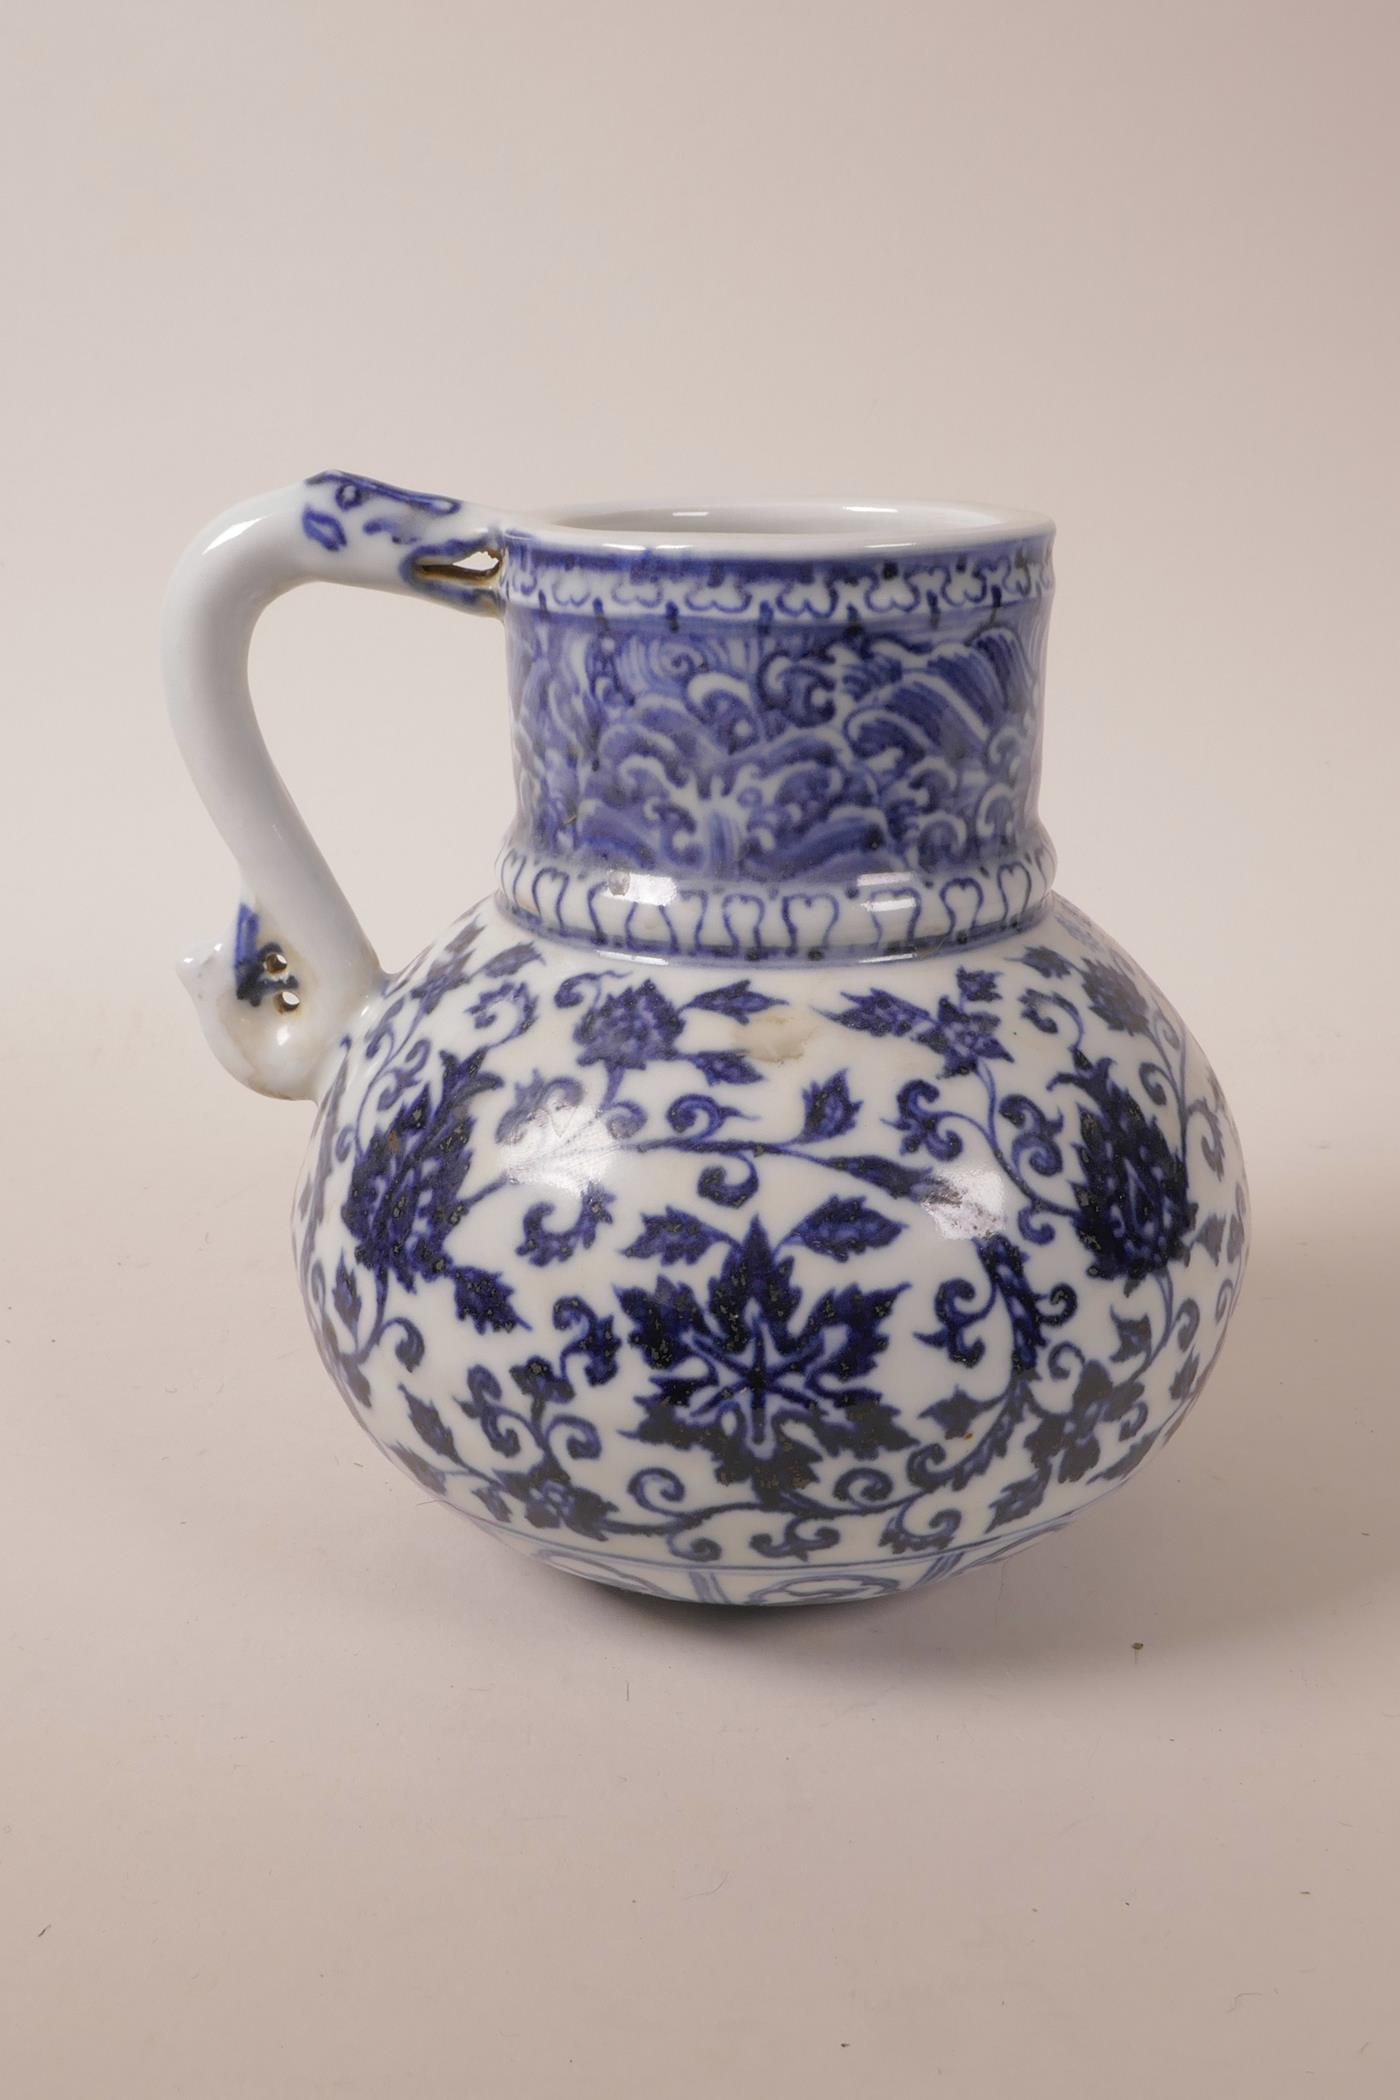 A Chinese blue and white porcelain wine jug with scrolling lotus flower decoration, 4 character mark - Image 3 of 5